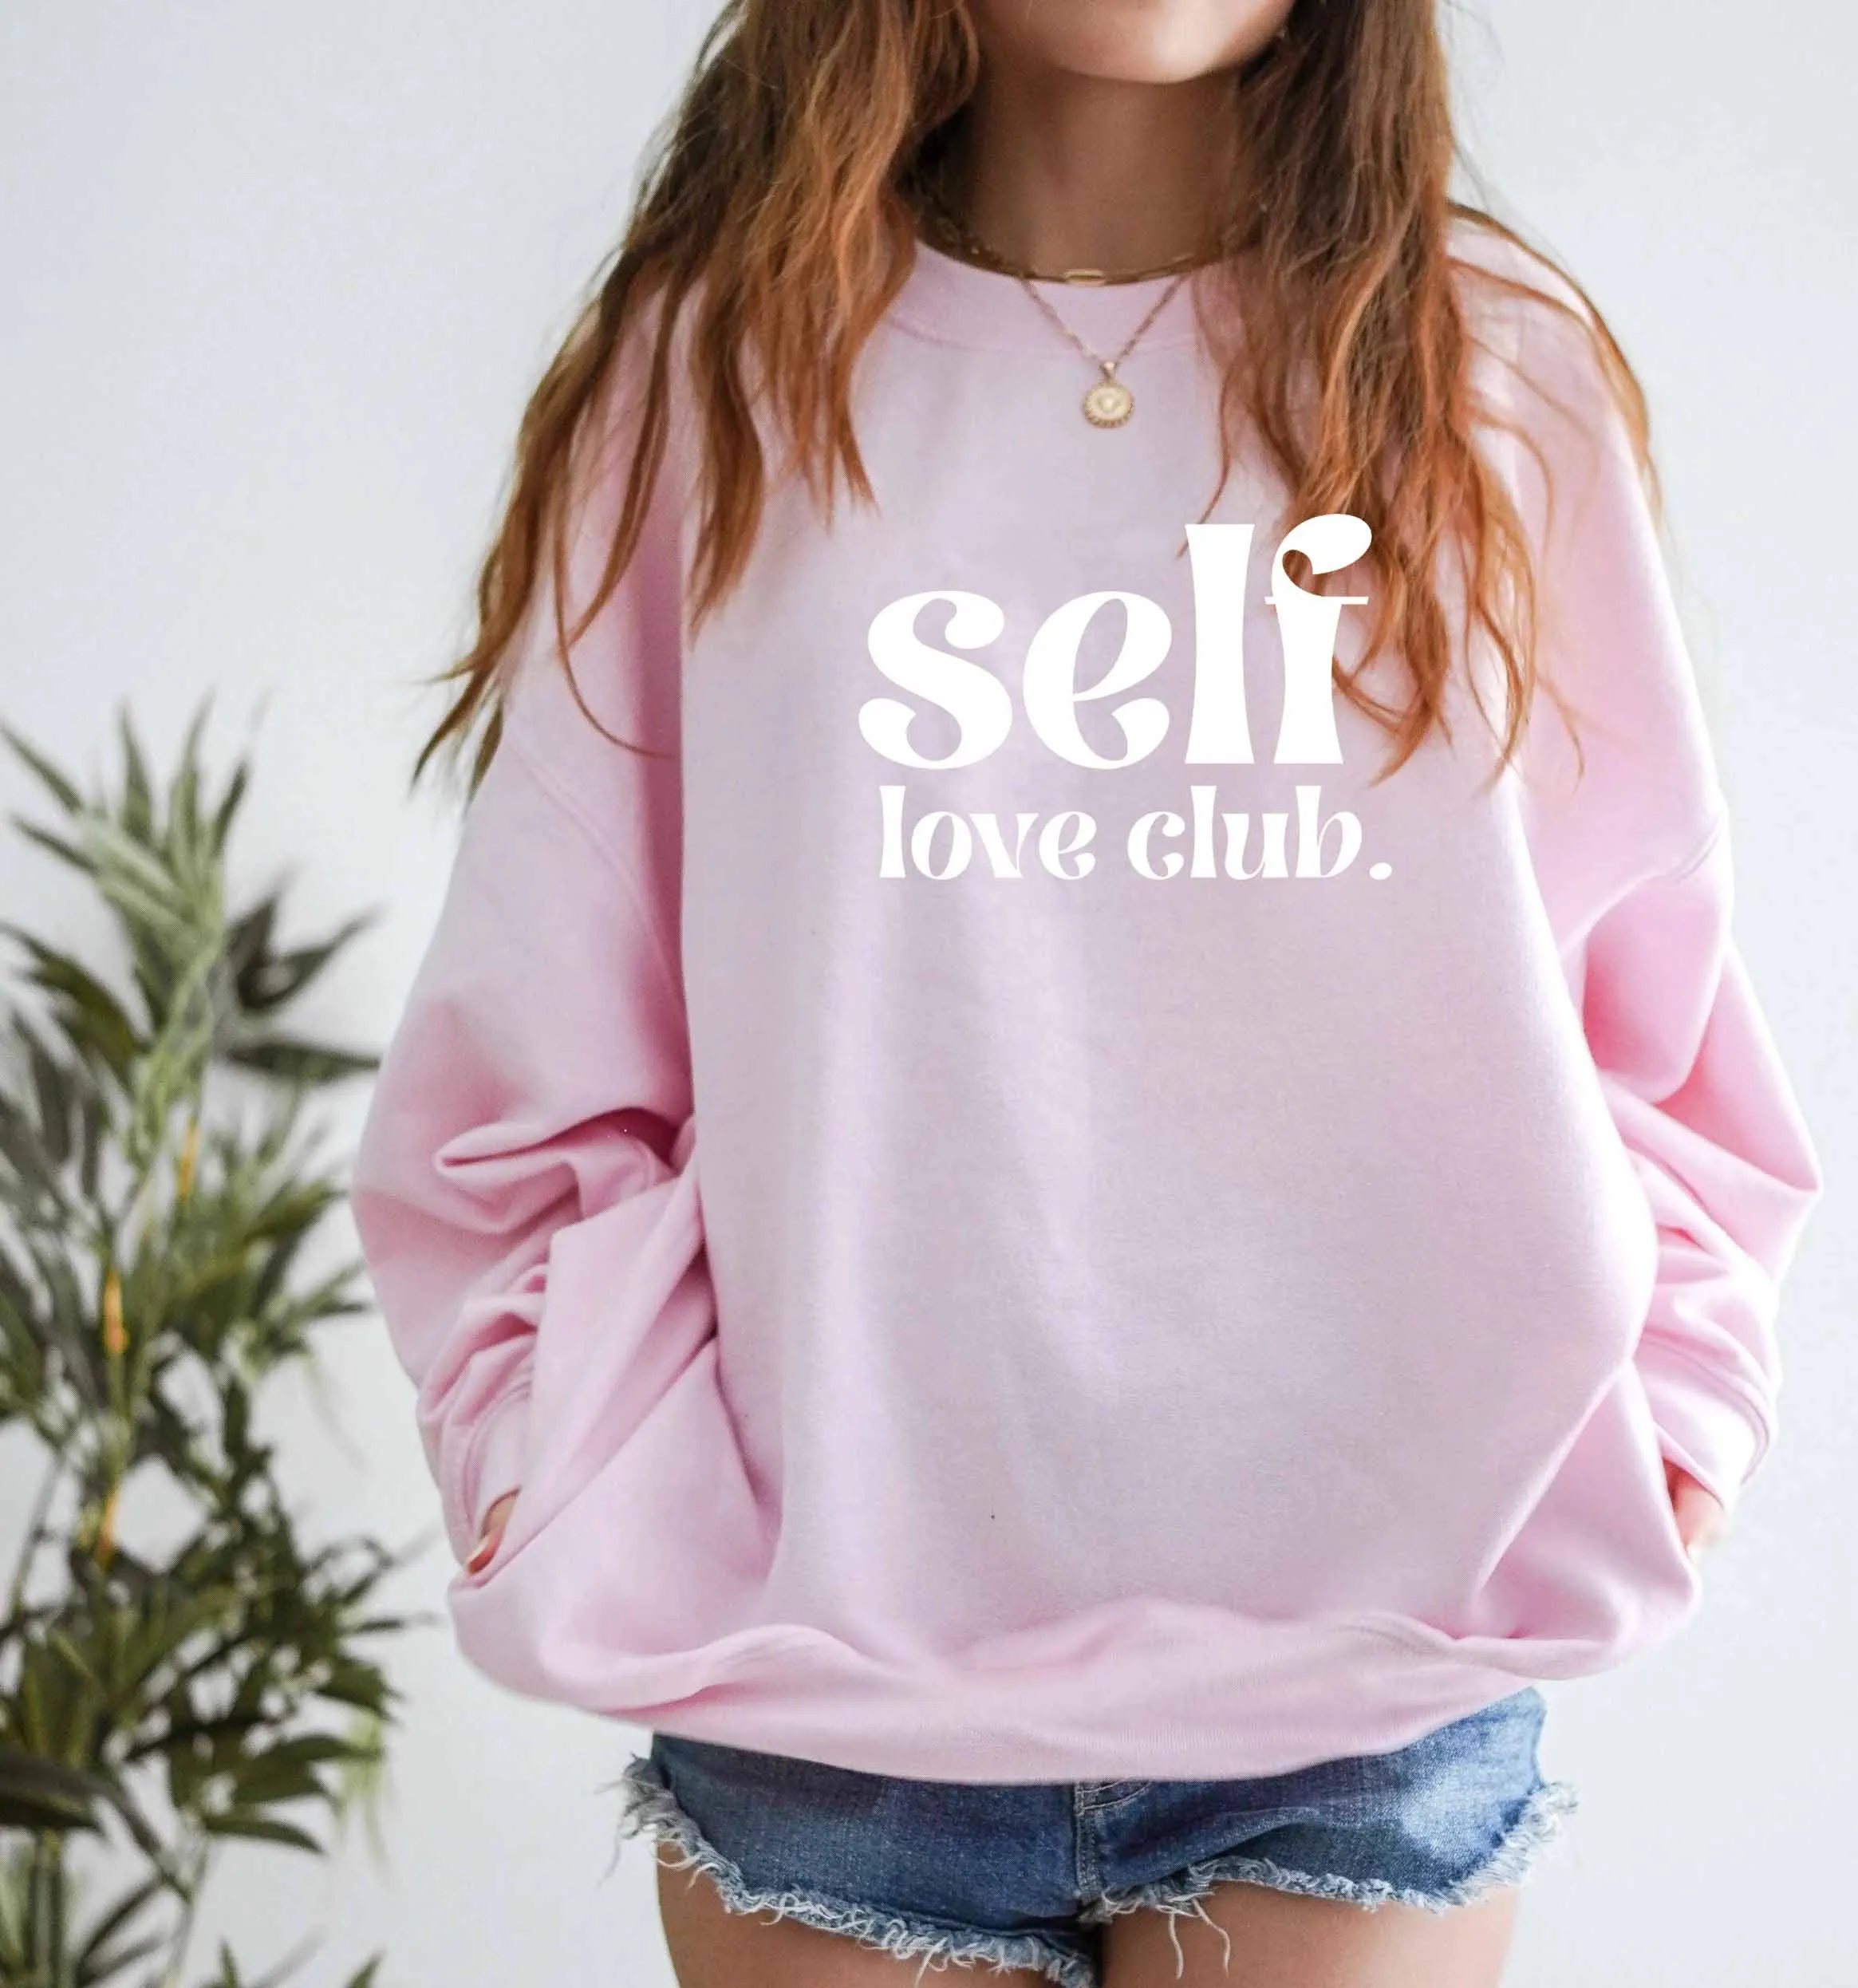 

Self Love Club Sweatshirt graphic women fashion funny grunge tumblr hipster vintage party pullovers youngs quote slogan tops